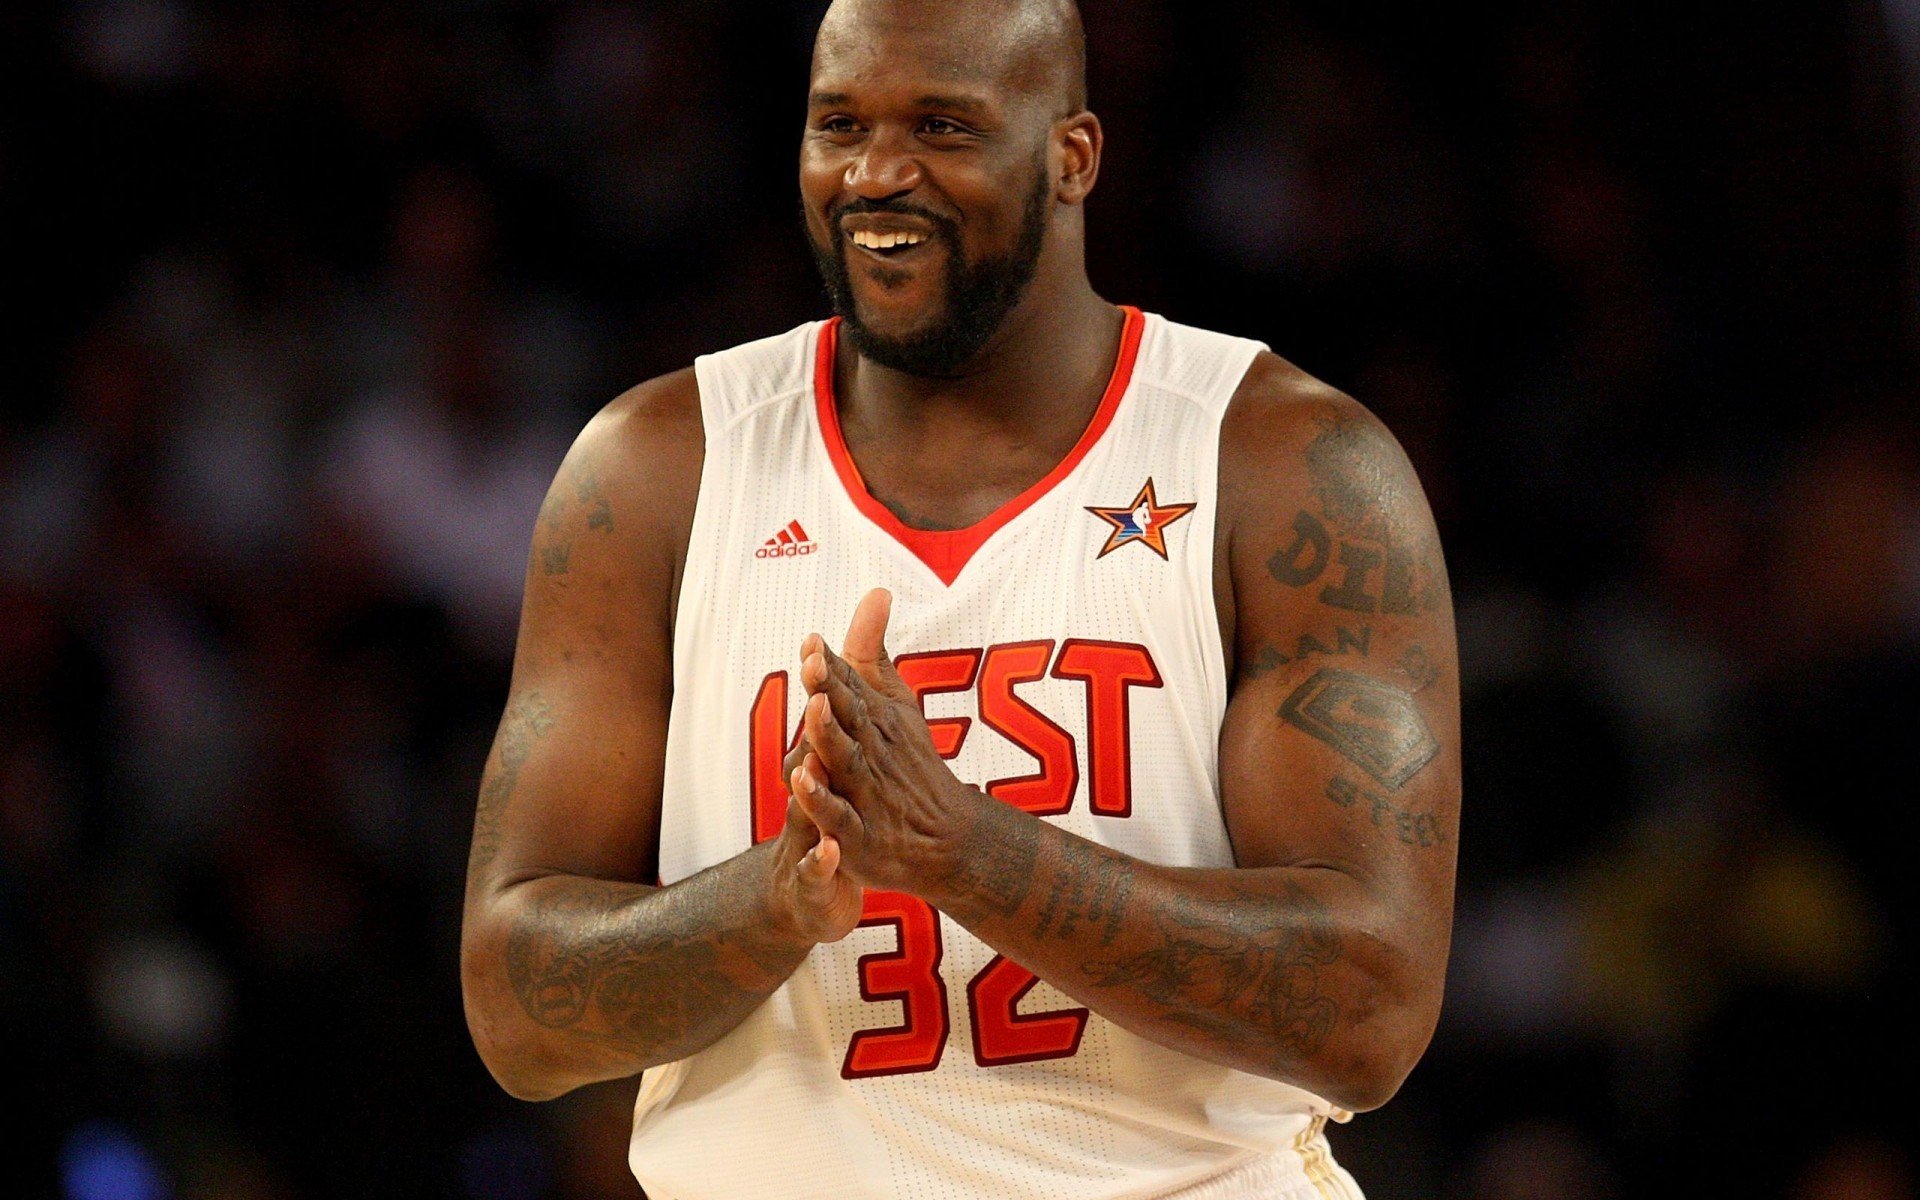 Shaquille ONeal To Appear In MyVEGAS Casino Games